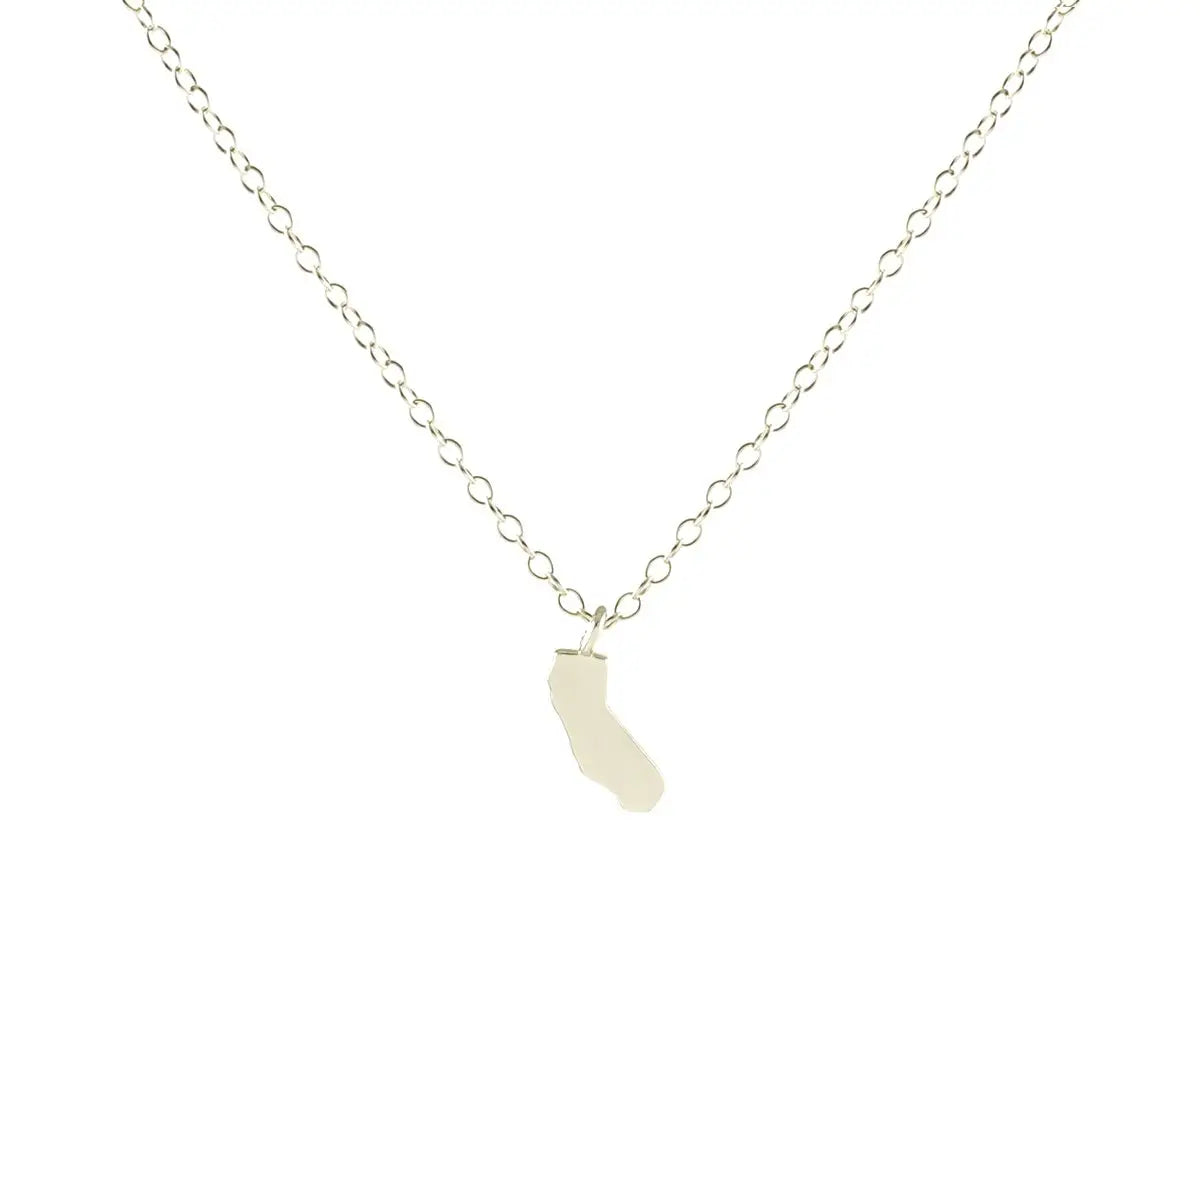 California Charm Necklace (Gold, Silver)